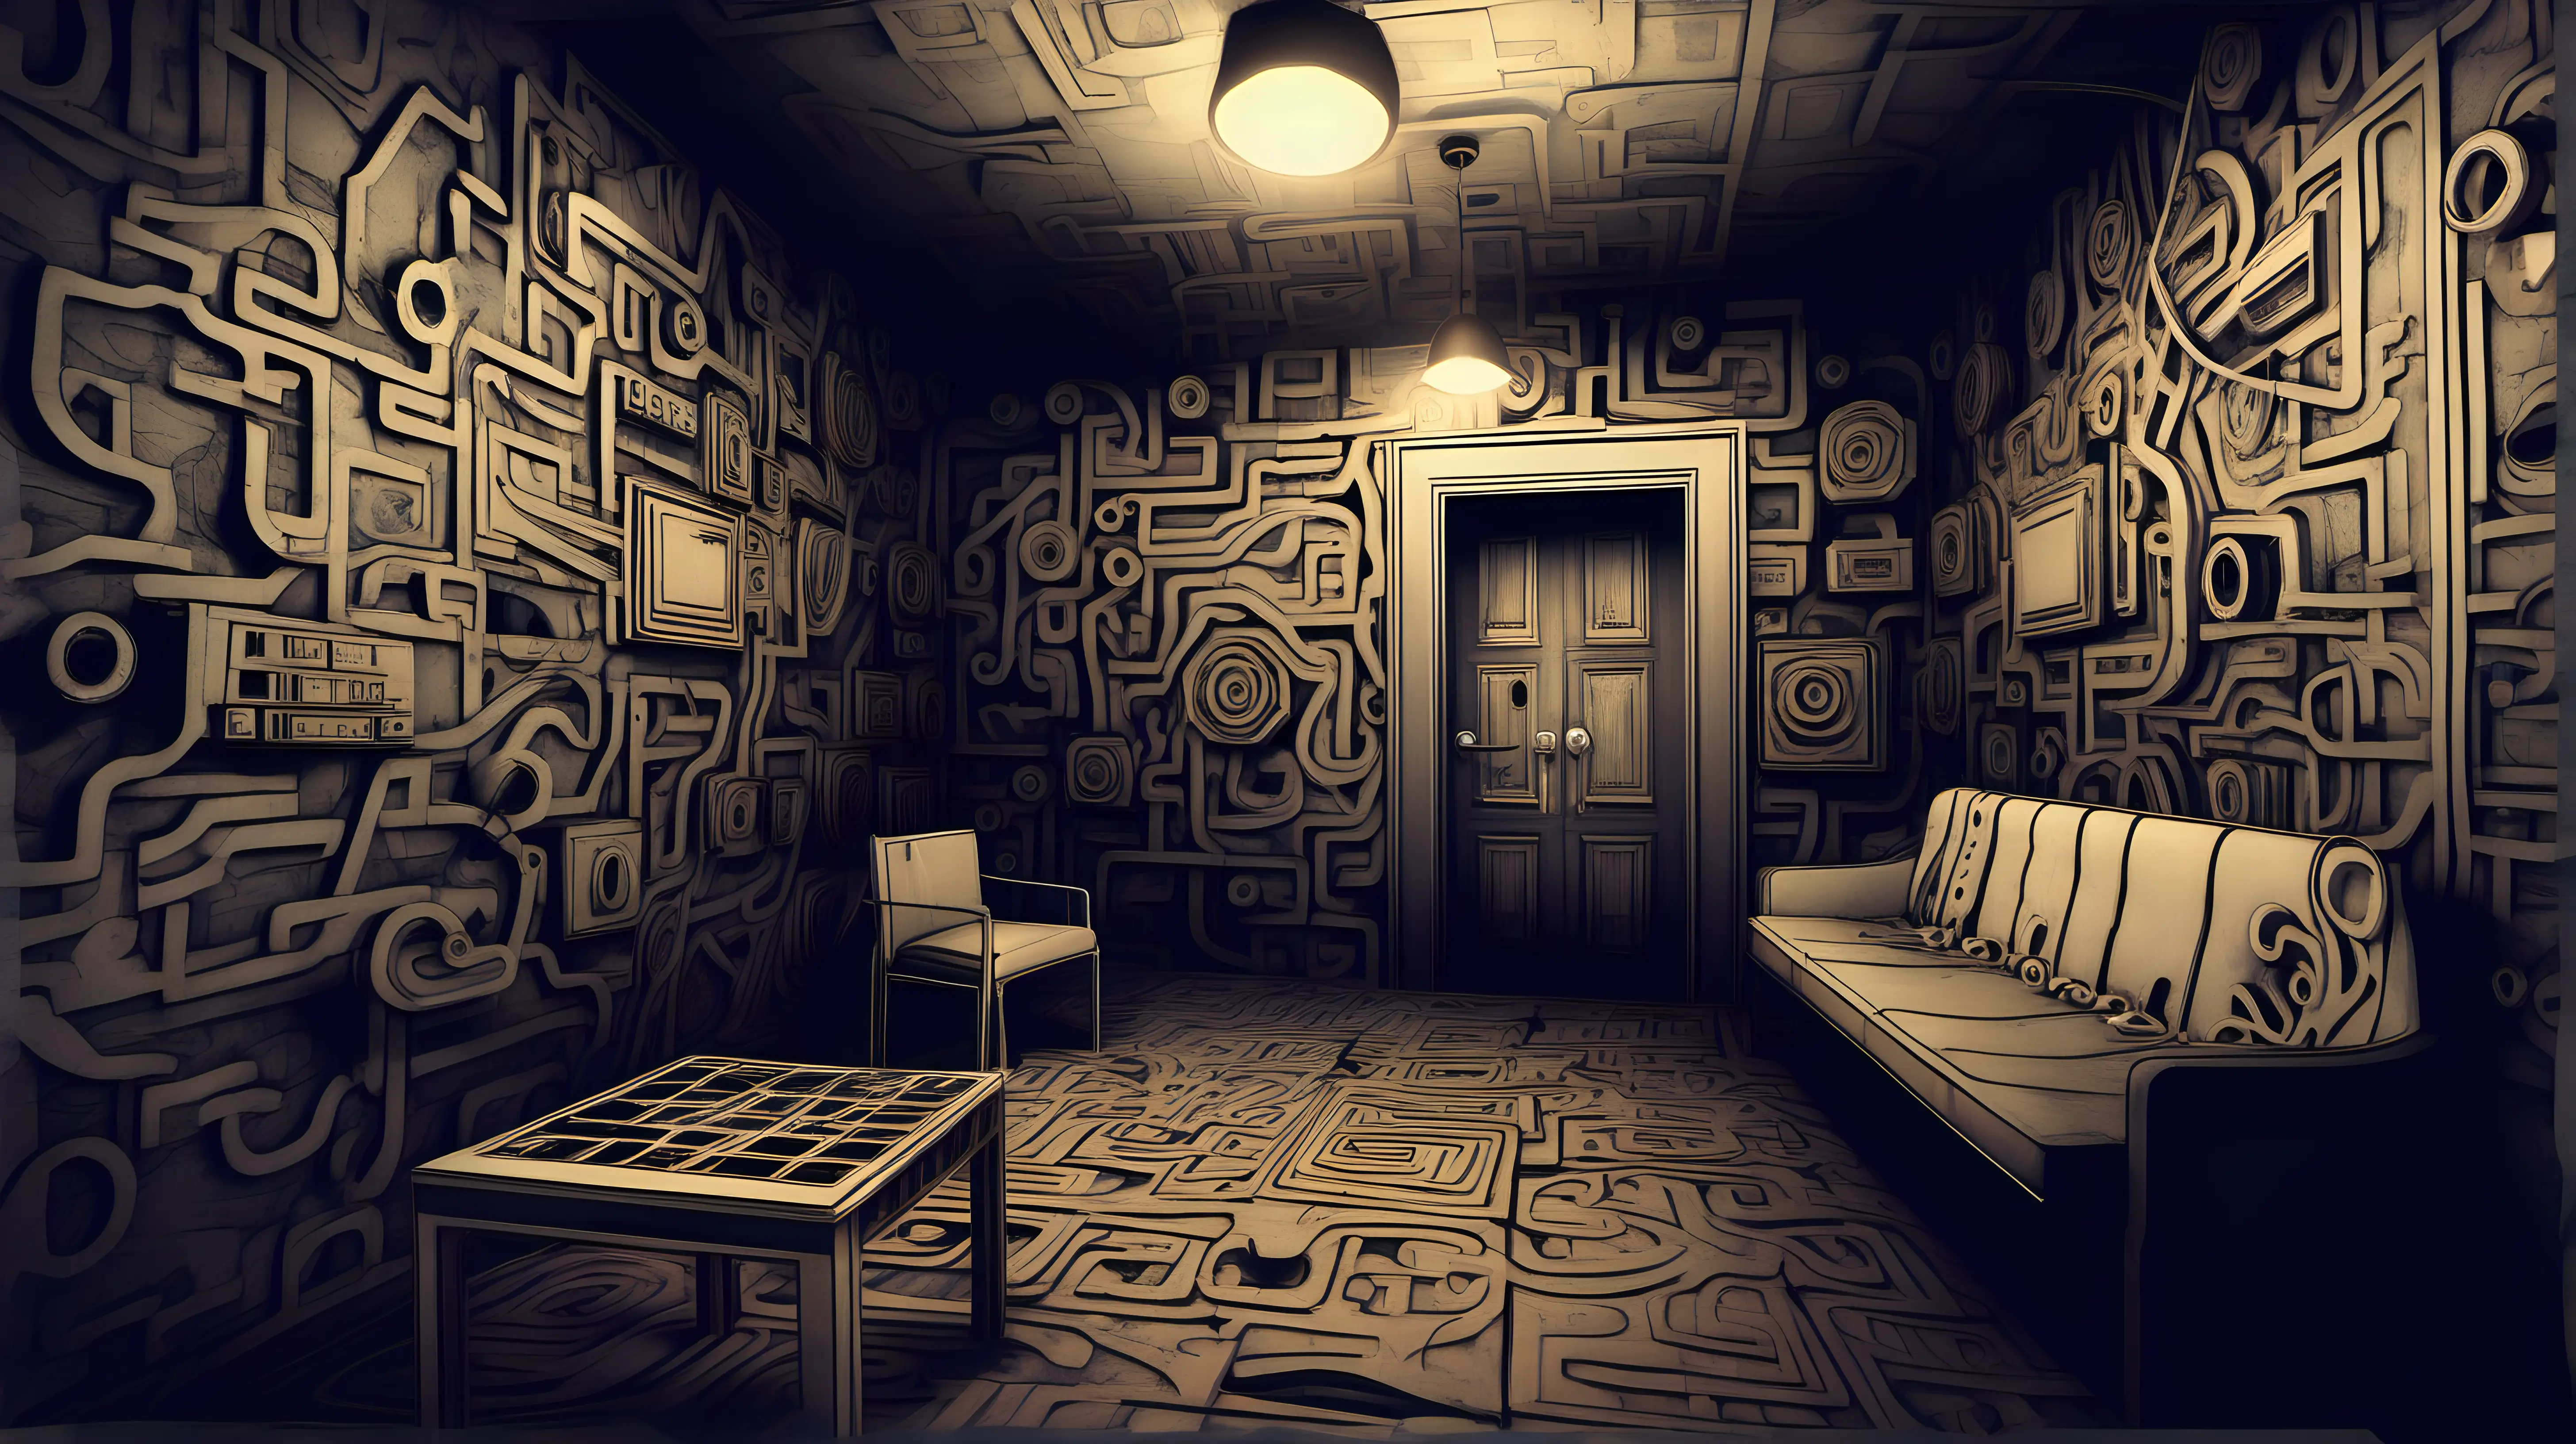 Surreal VR Escape Room Experience Puzzle Solving in Digital Worlds